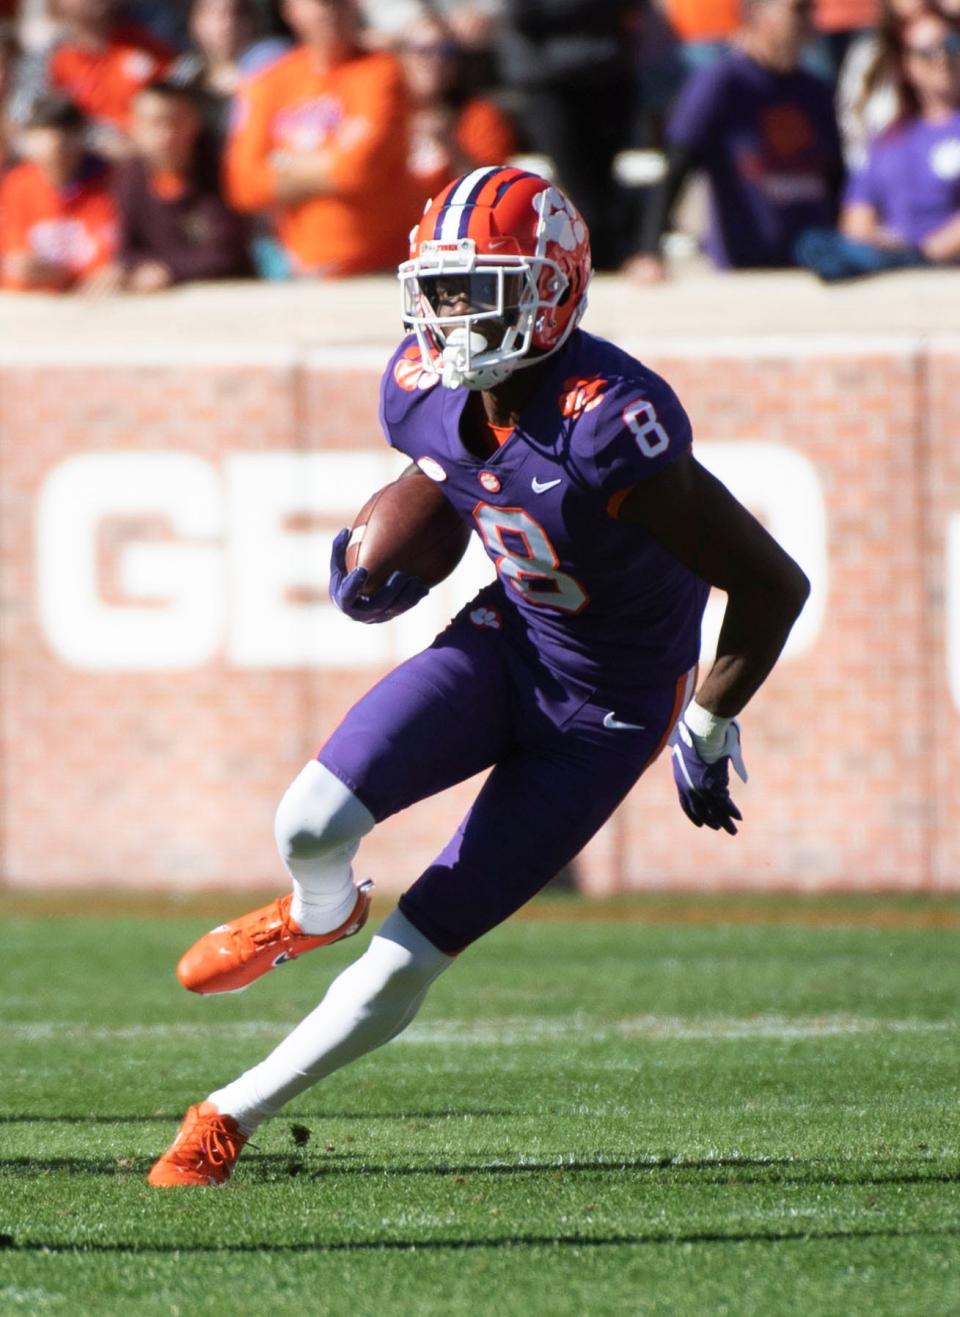 Clemson Tigers wide receiver Justyn Ross (8) takes the ball down the field while playing against Connecticut Huskies at Memorial Stadium Saturday, Nov. 13, 2021.